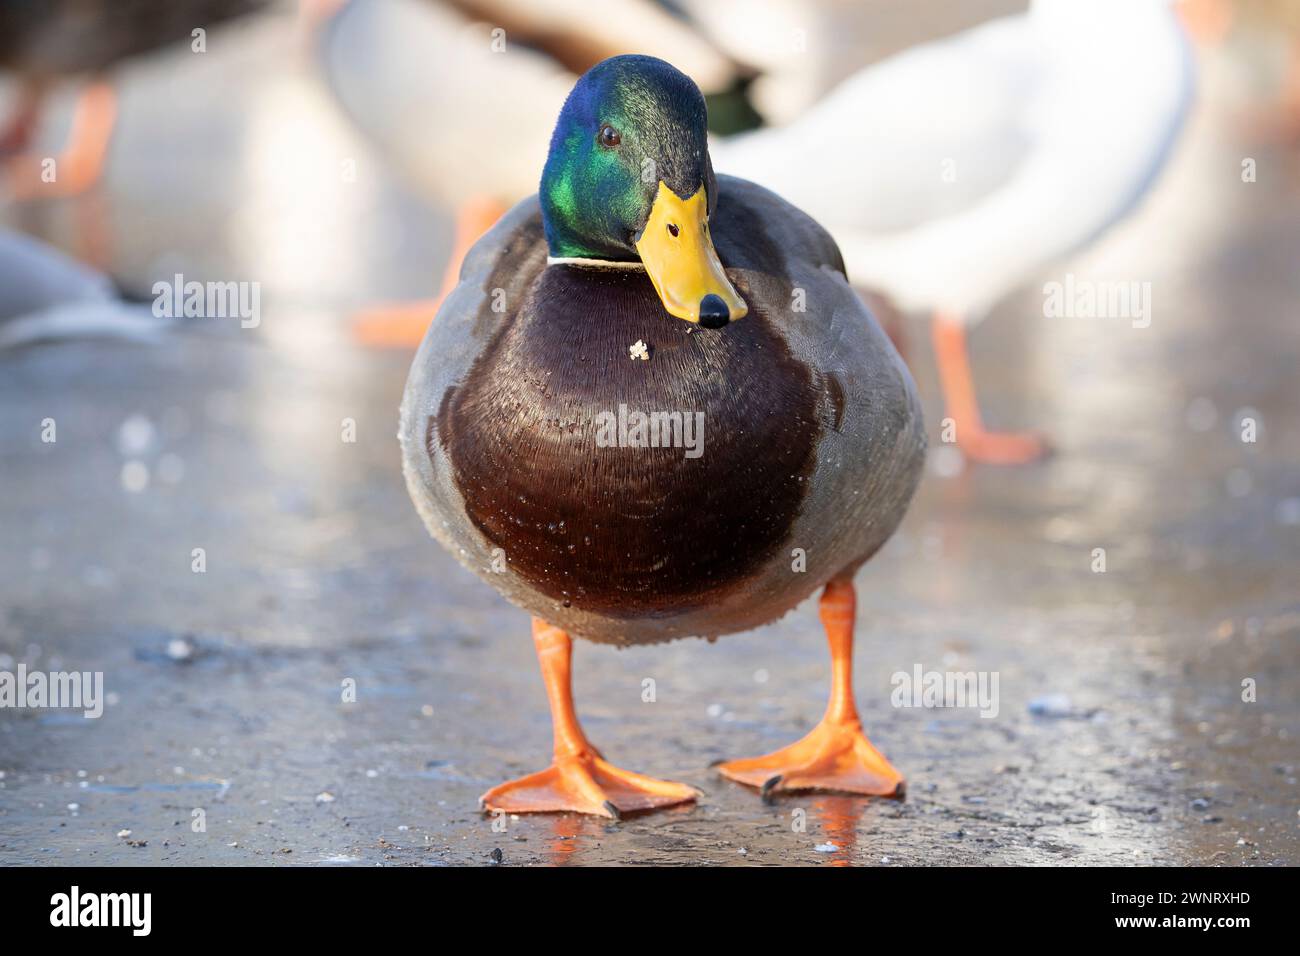 Kidderminster, UK. 19th January, 2024. UK weather: freezing conditions hit the UK as temperatures remain incredibly low and nature ponds remain frozen. A mallard duck walks on the ice of a frozen pool searching for food in the bright sunshine today. Credit: Lee Hudson/Alamy Stock Photo